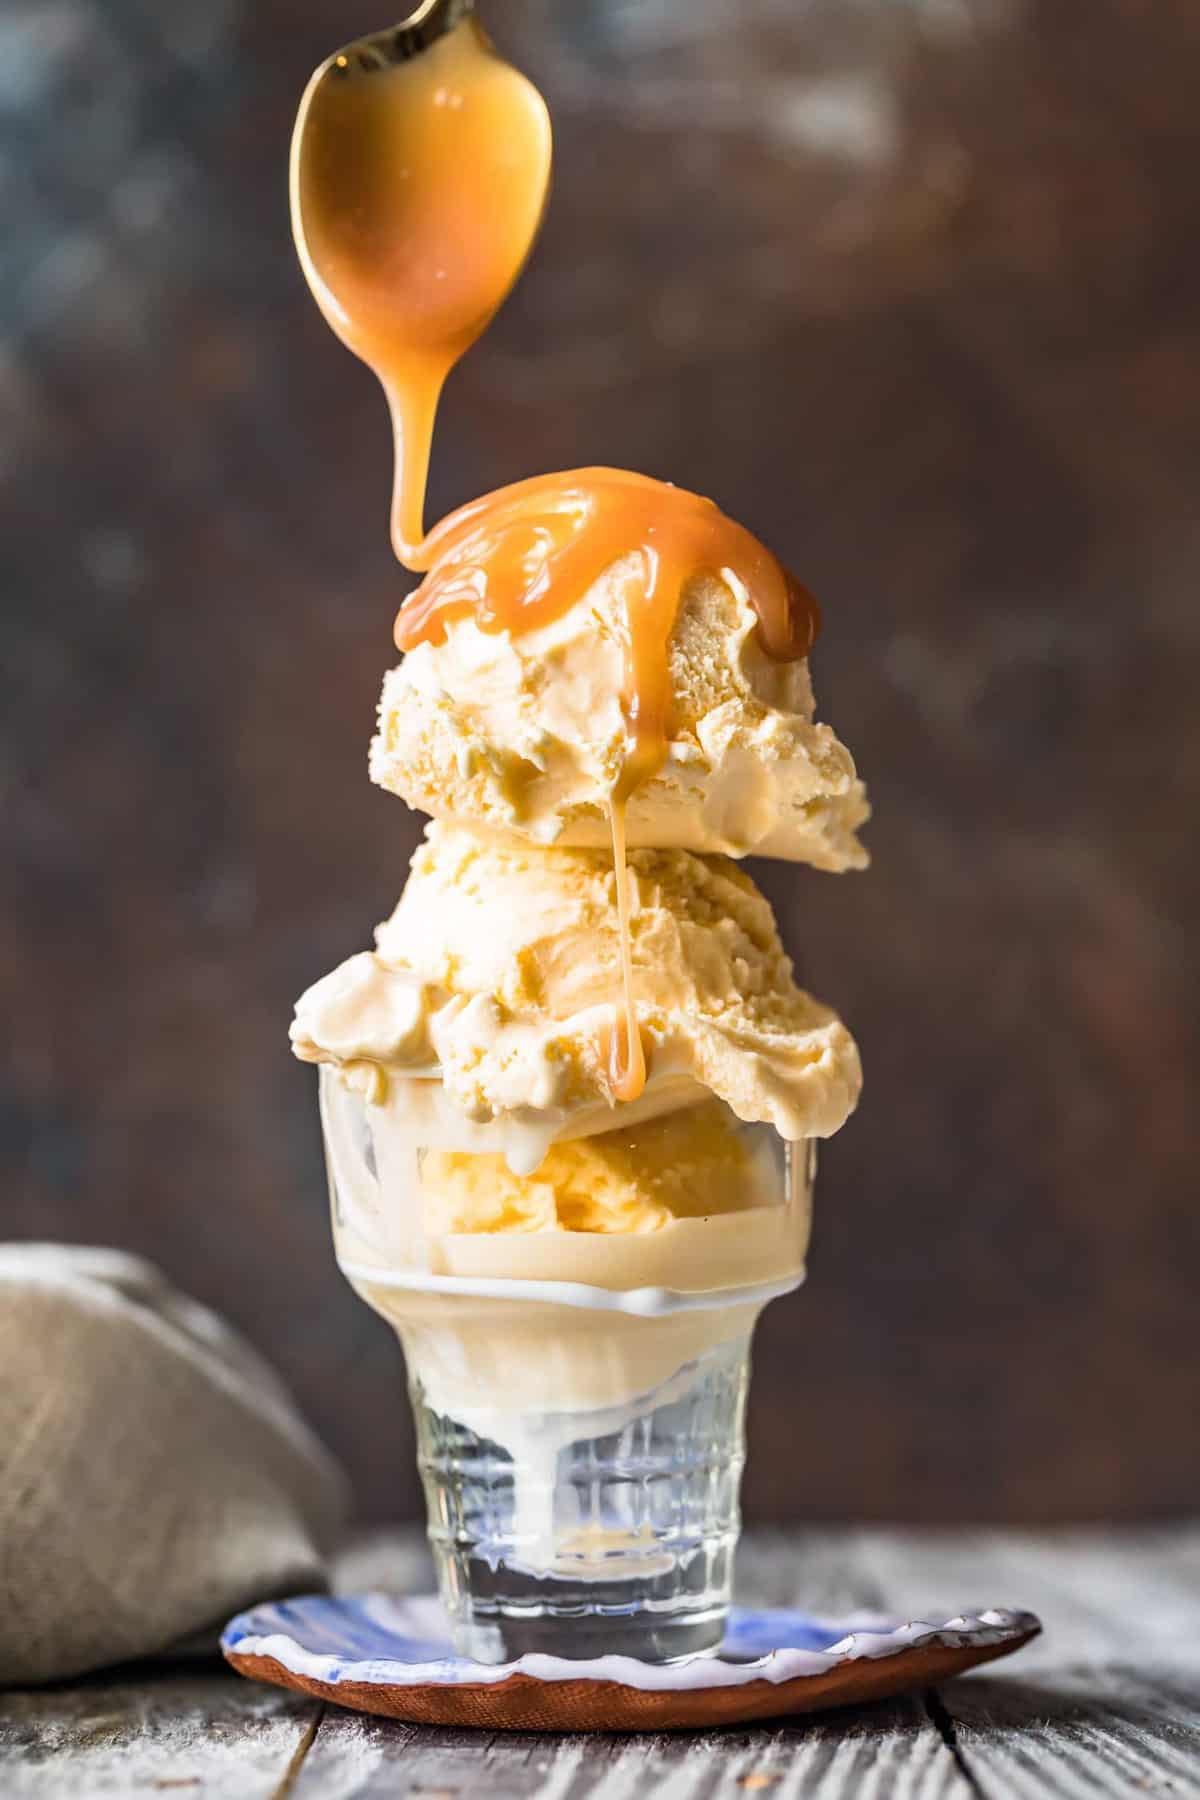 A spoon drizzling sauce on top of ice cream